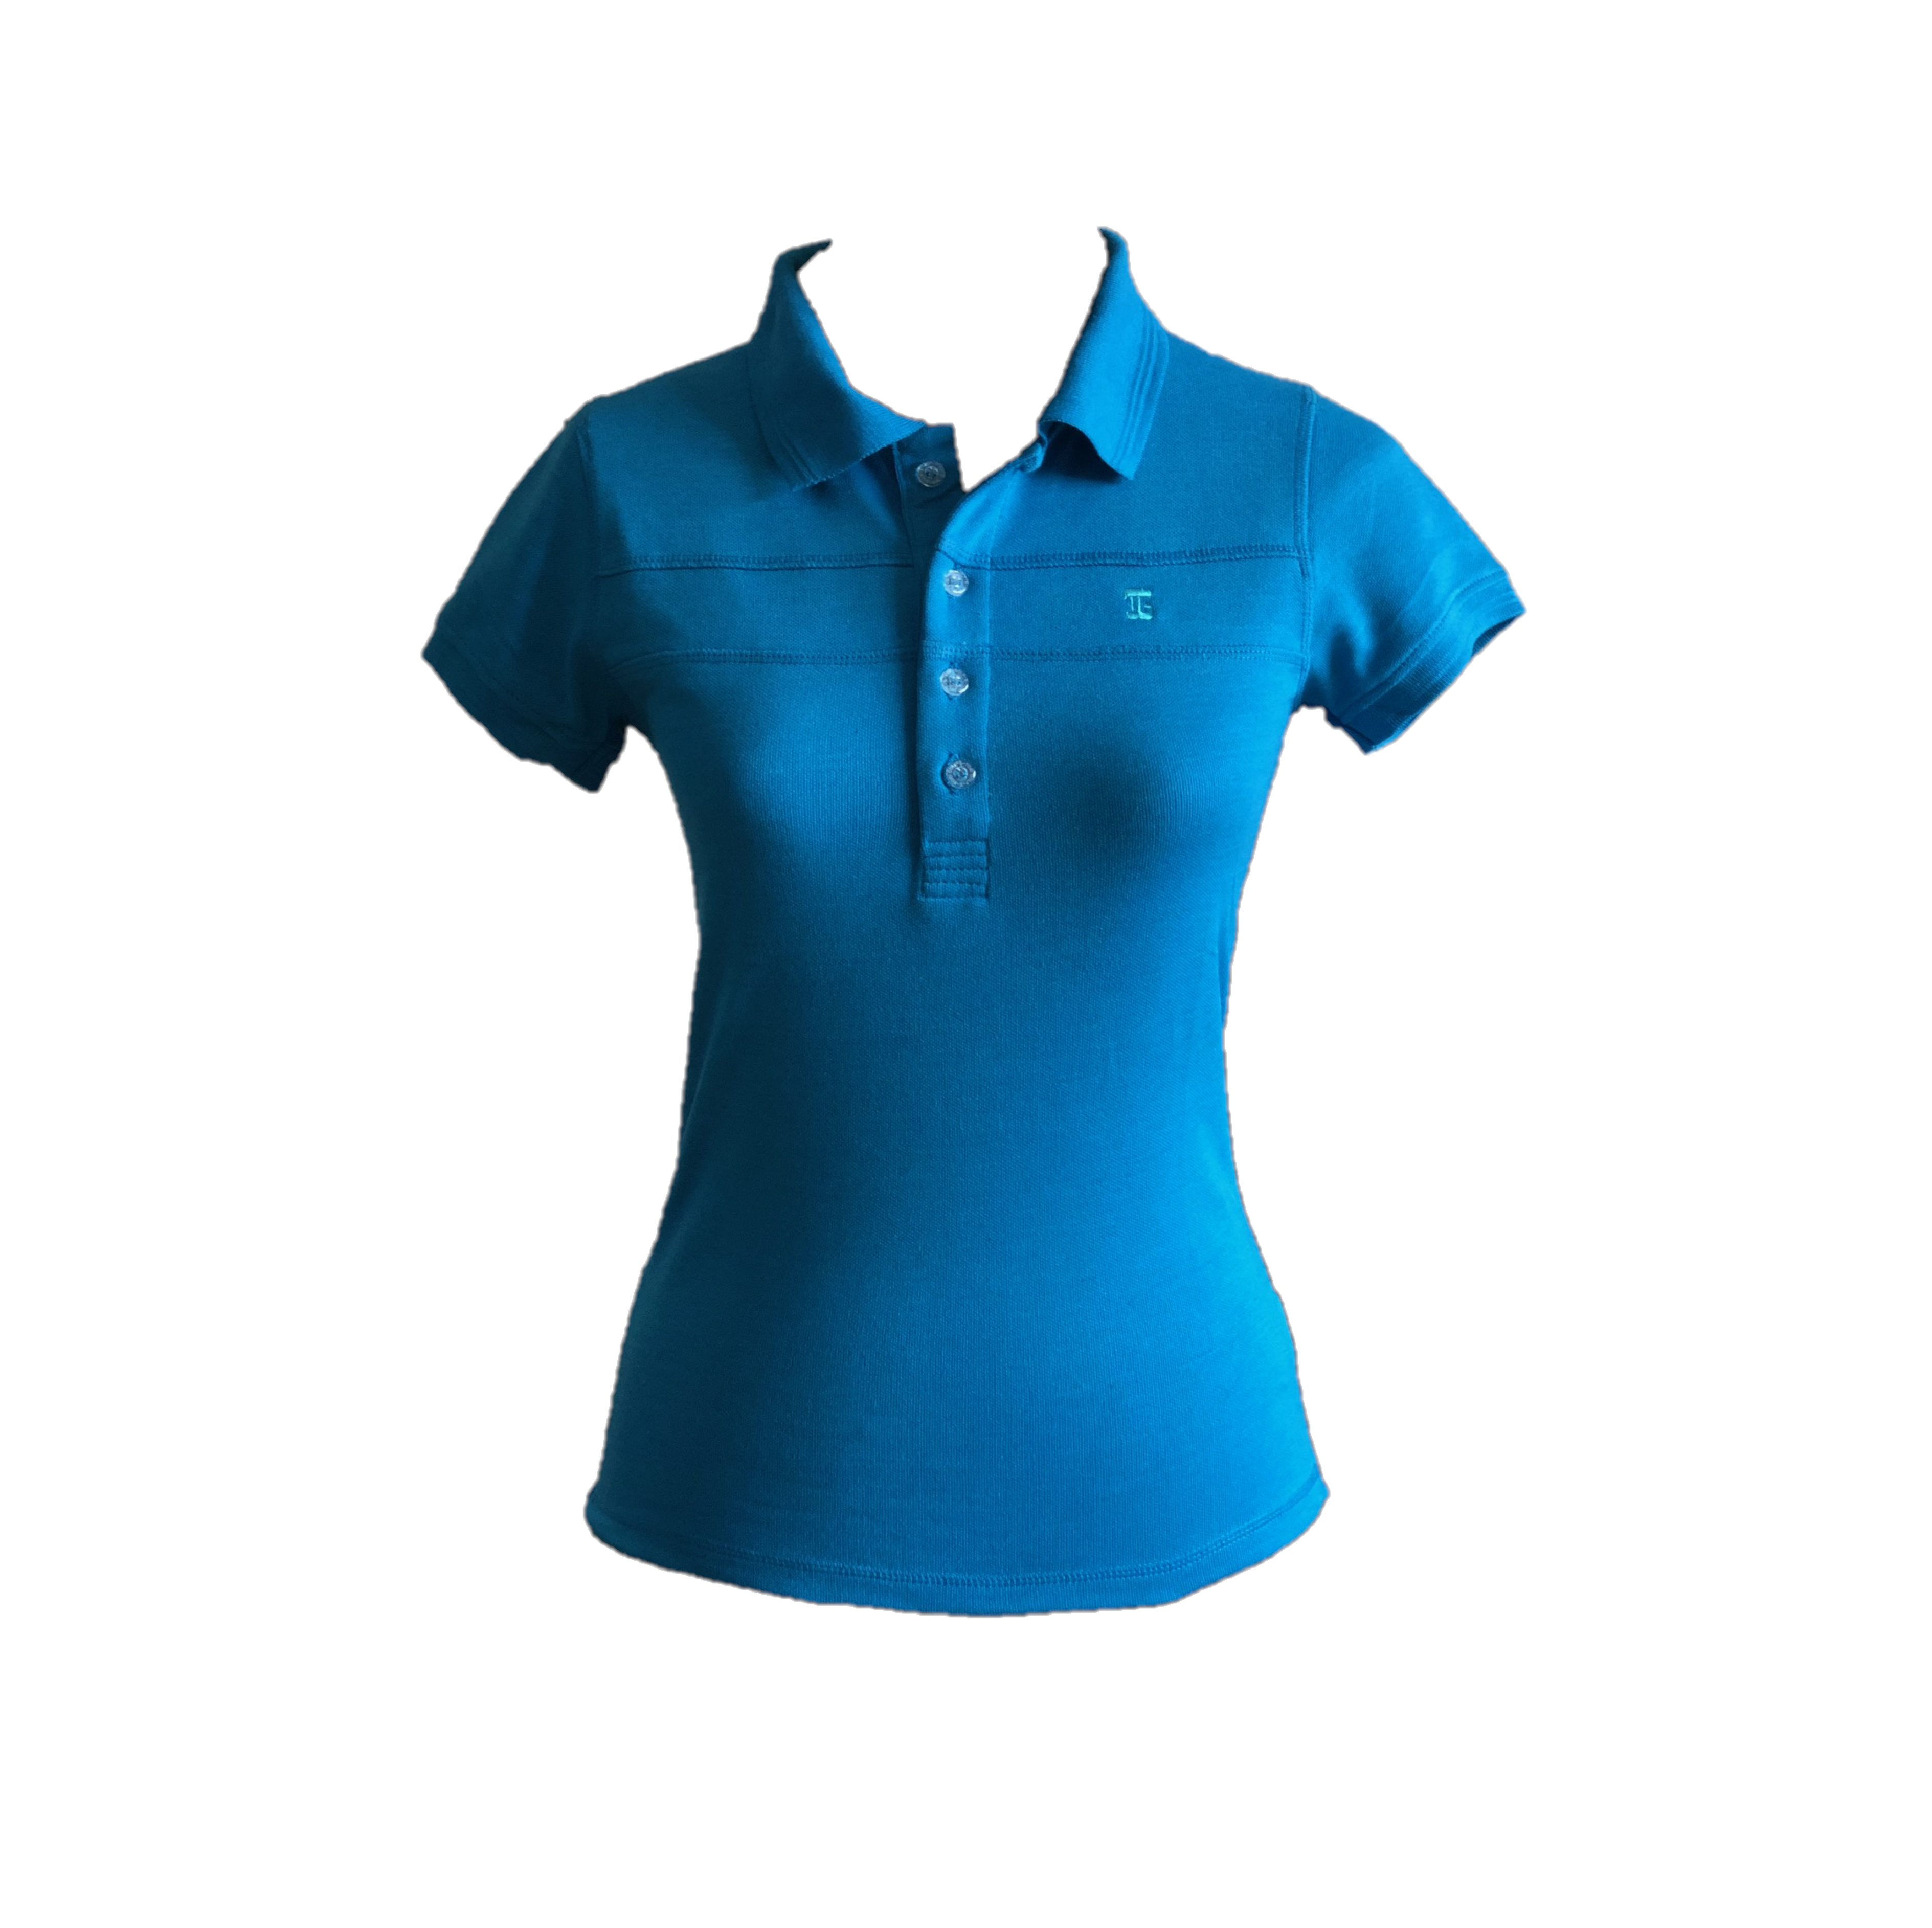 LT – 102A || Ladies Top Short Sleeve Mid Ocean Blue  With Broad Overlocked Horizontal Chest One Concealed Side Seam Pocket and Back Strips In Seld Color